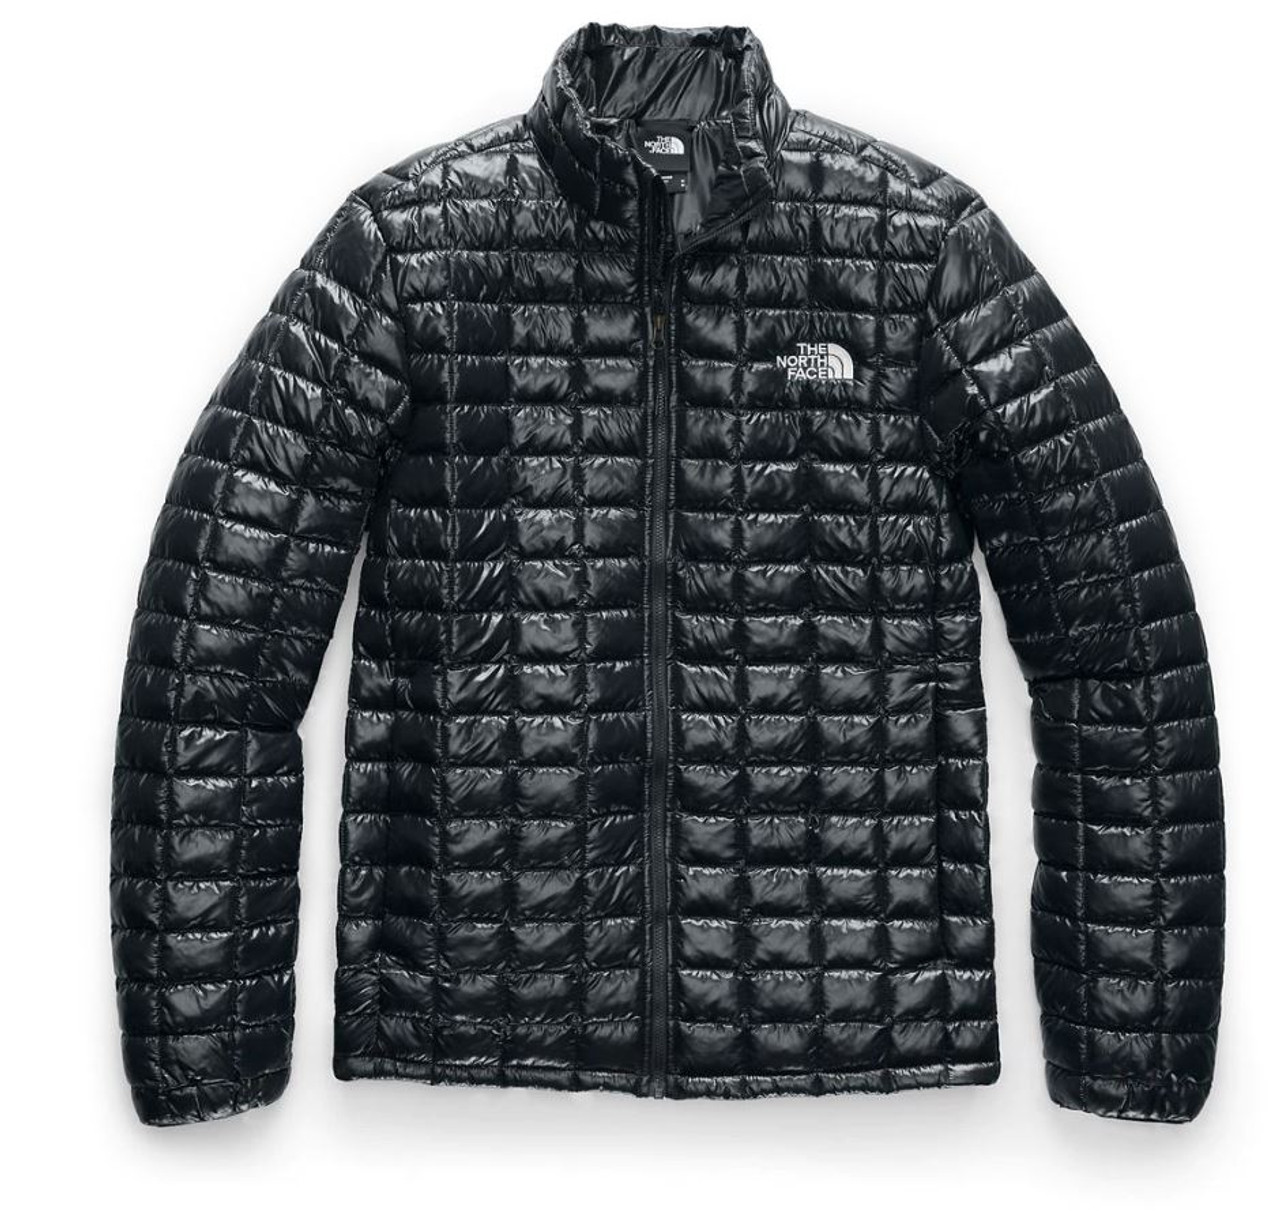 men's thermoball jacket sale